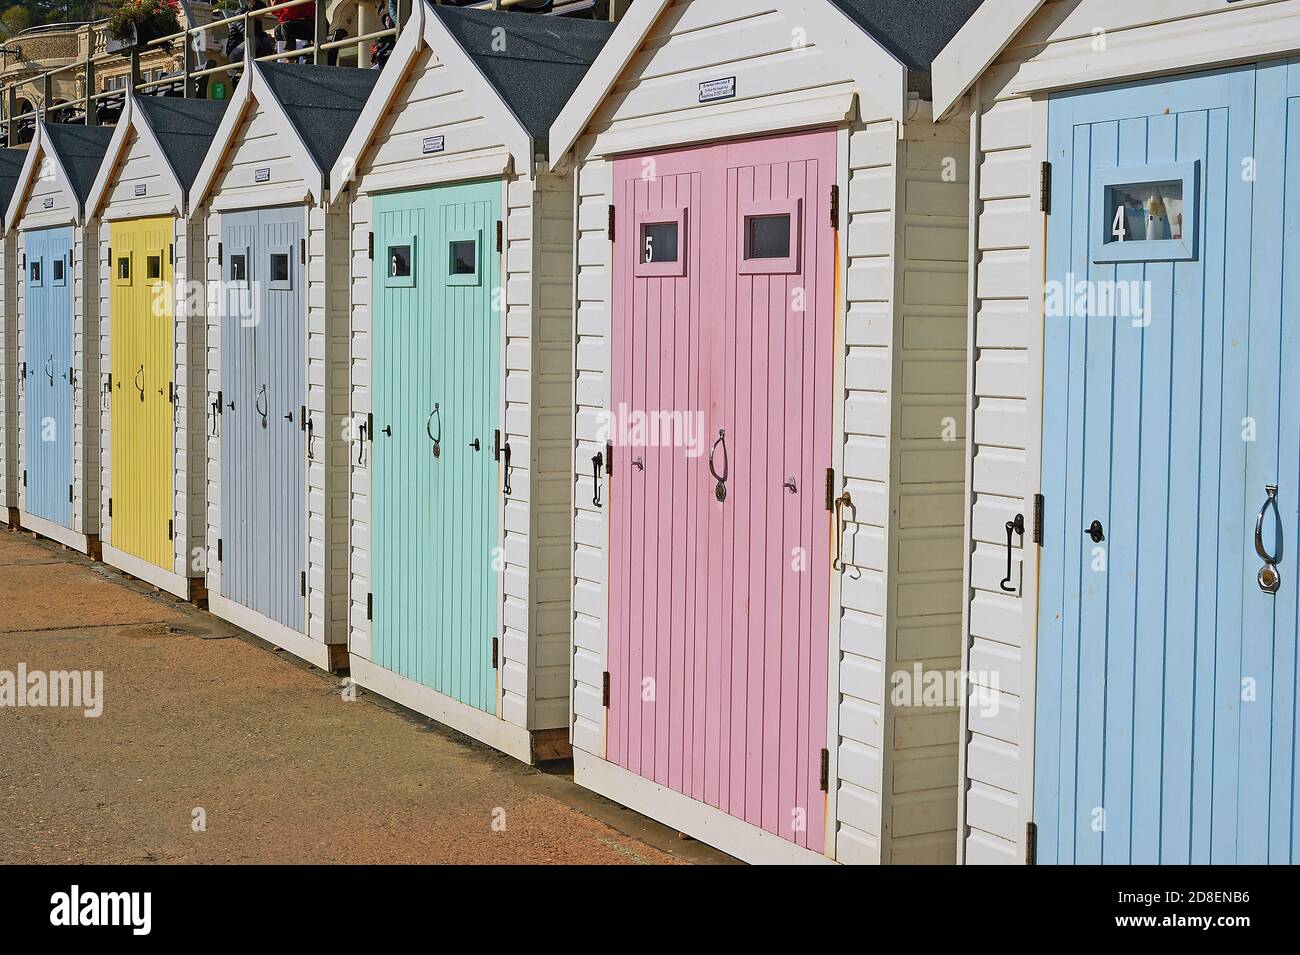 Lyme Regis, Dorset and soft pastel coloured wooden doors adorn beach huts on the seafront promenade. Stock Photo